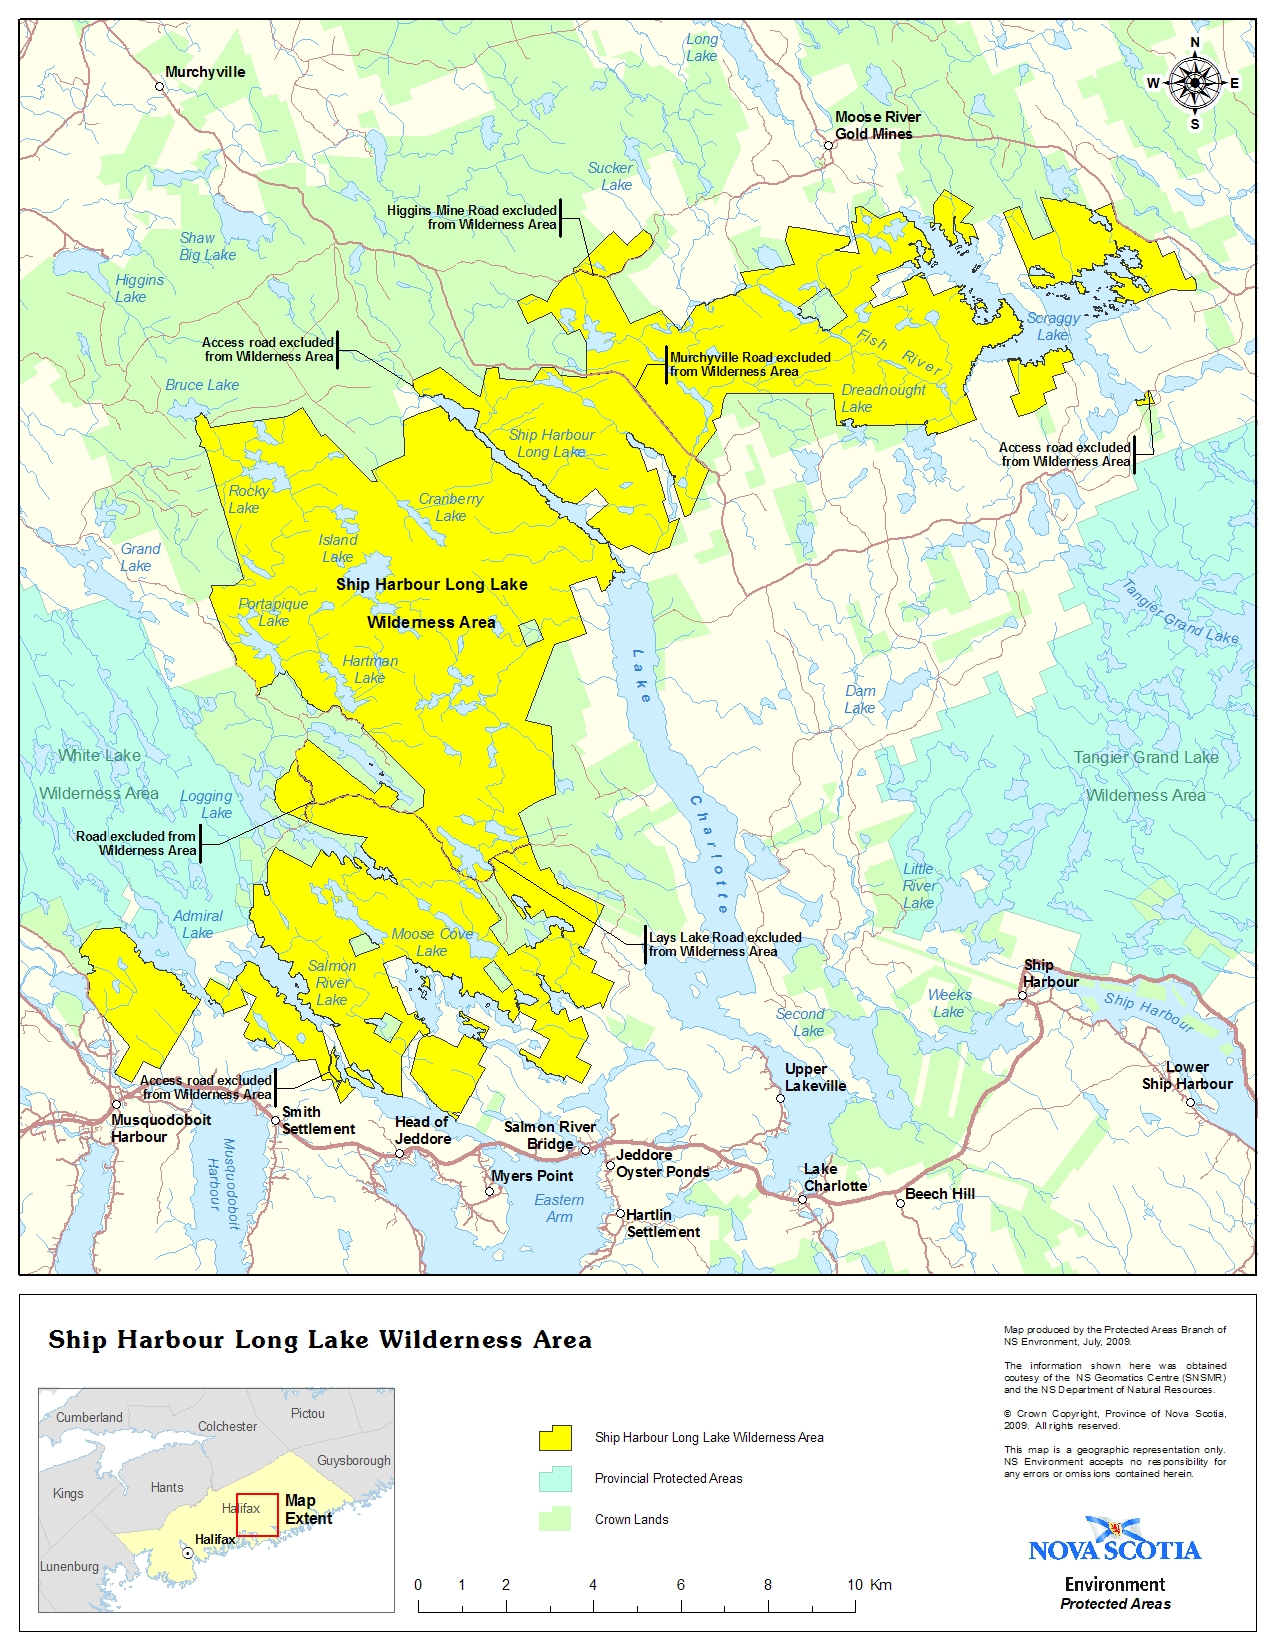 Graphic showing map of Boundaries of Ship Harbour Long Lanke Wilderness Area